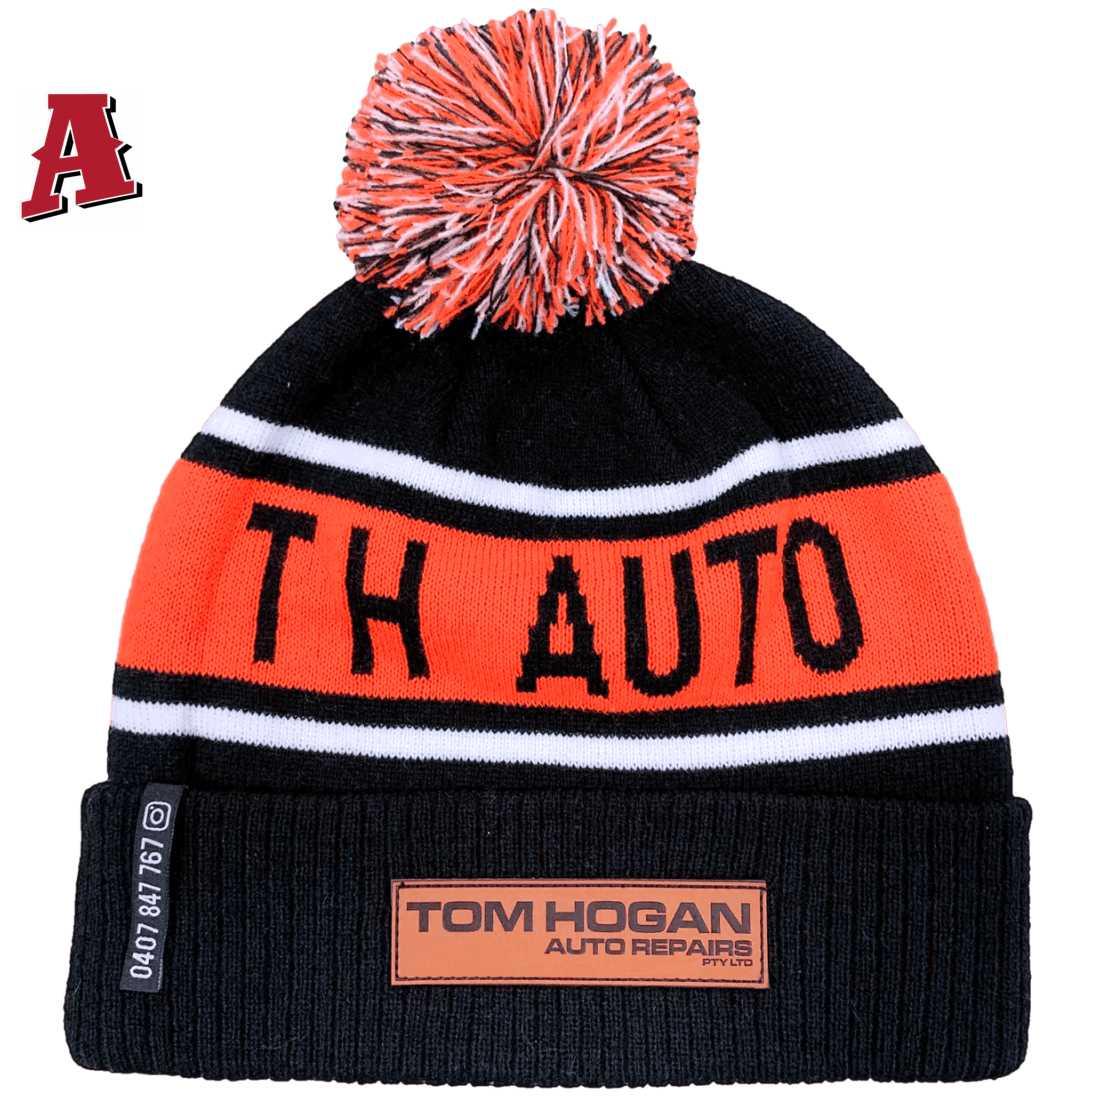 Tom Hogan Auto Repairs Kialla West Victoria Aussie Acrylic Beanie One Size Fits All with Pom Pom and Roll up Ribbed Cuff Black Orange White